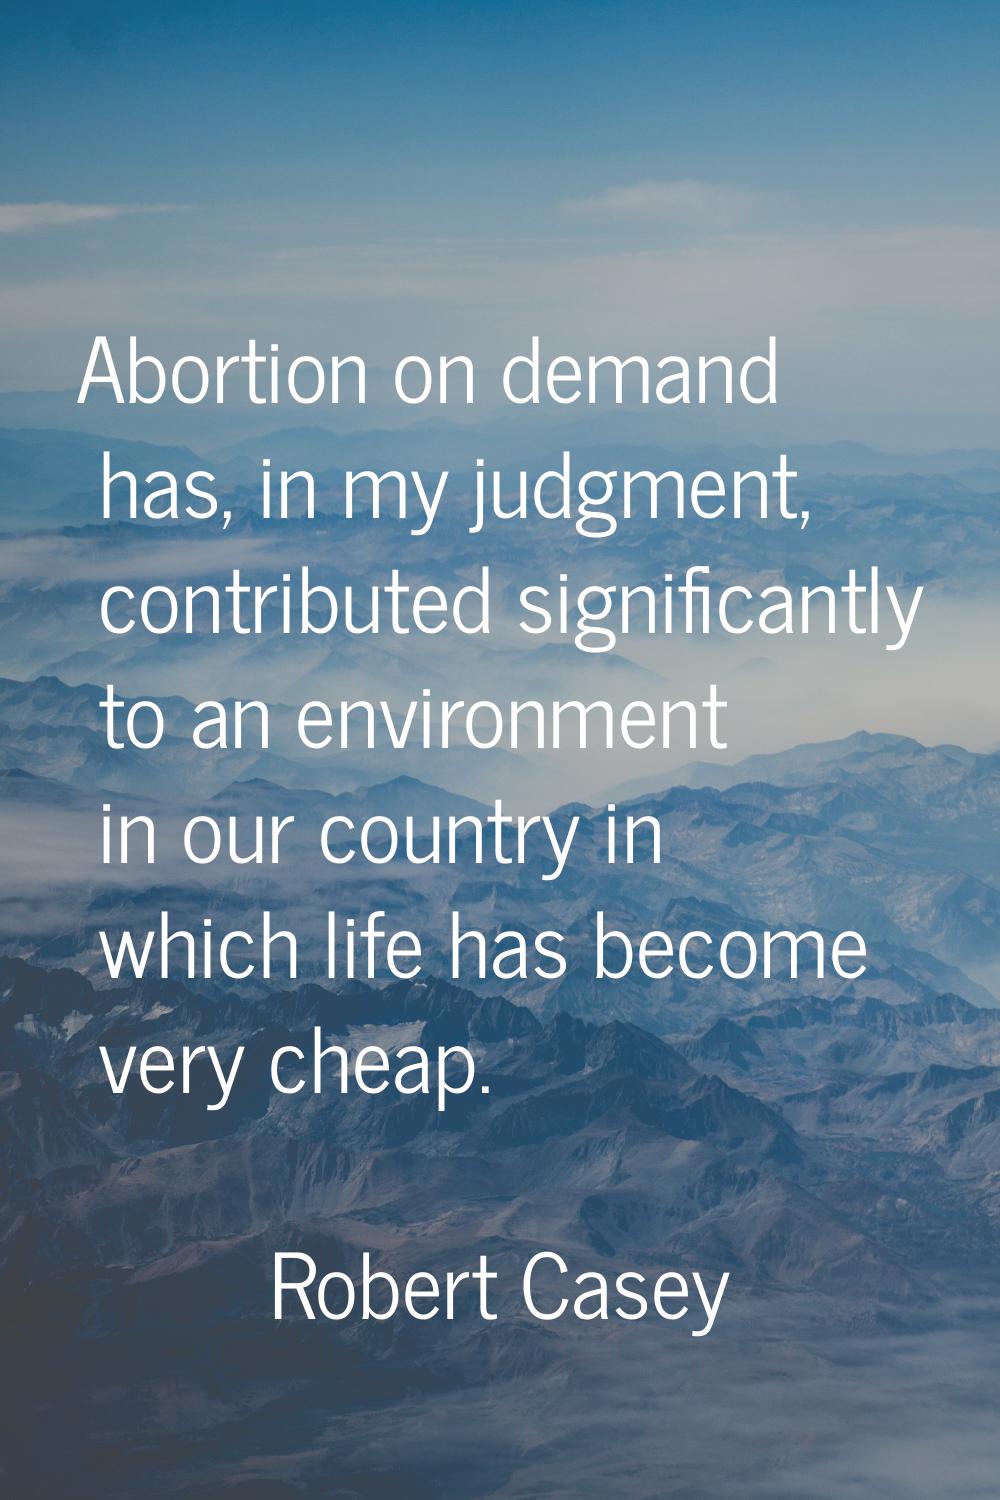 Abortion on demand has, in my judgment, contributed significantly to an environment in our country 